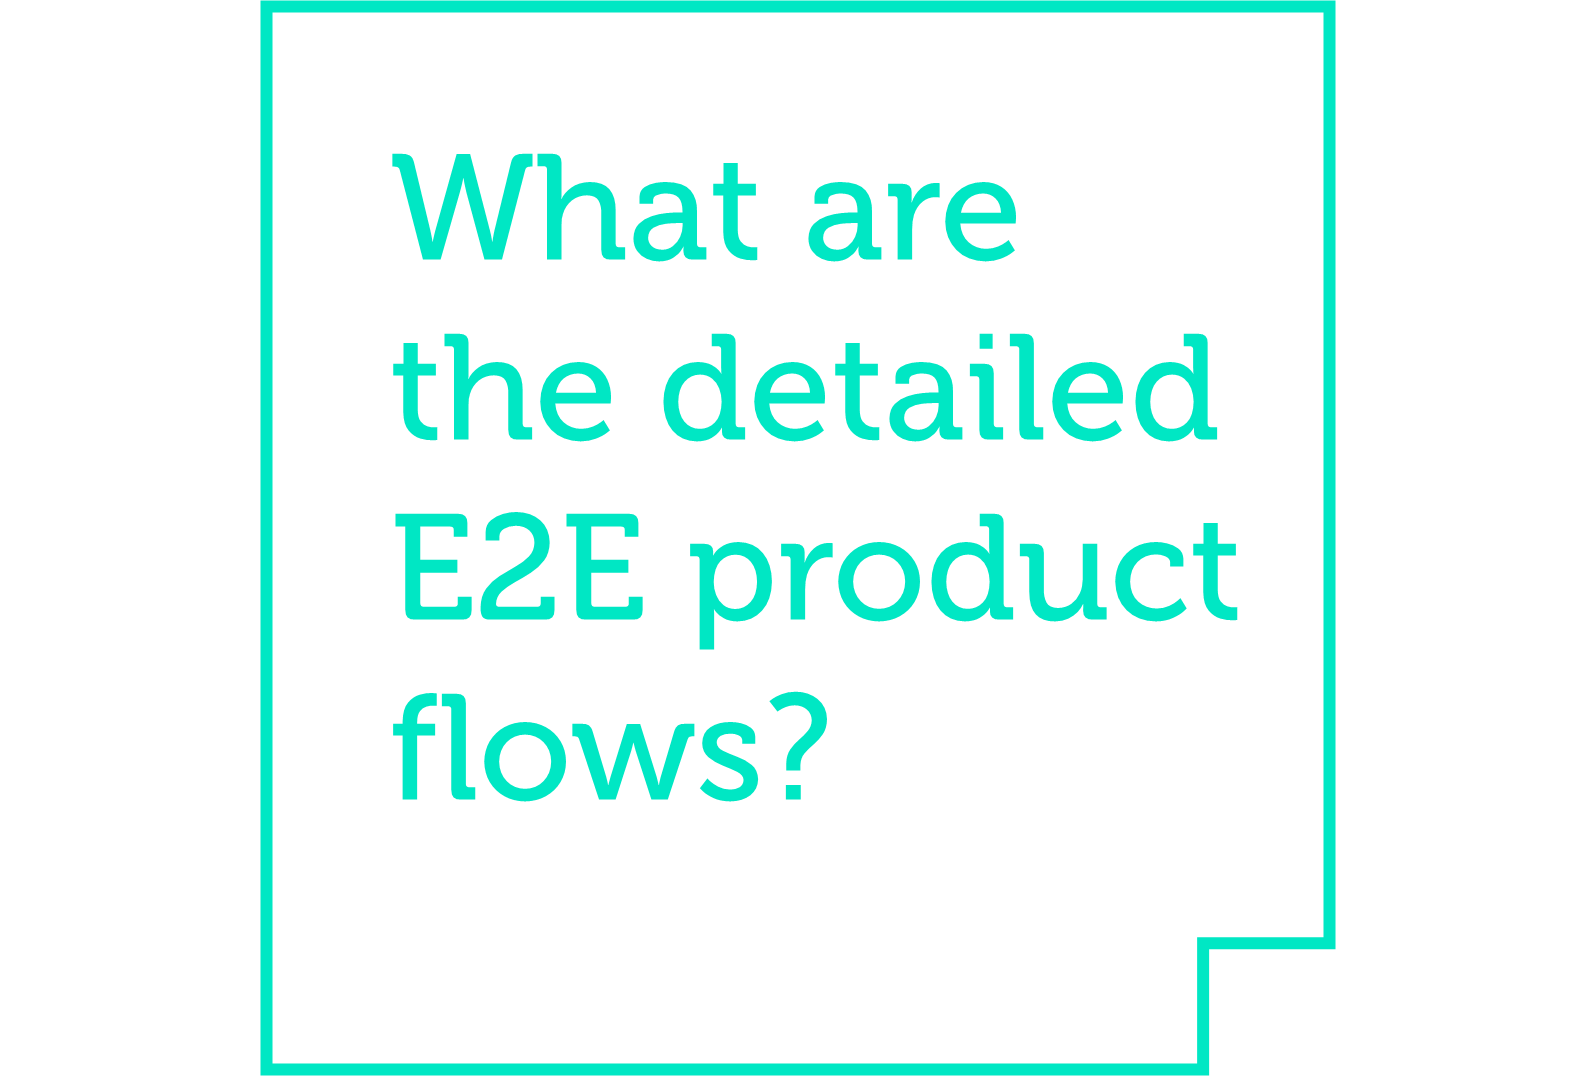 Axon: What are the detailed E2E product flows?